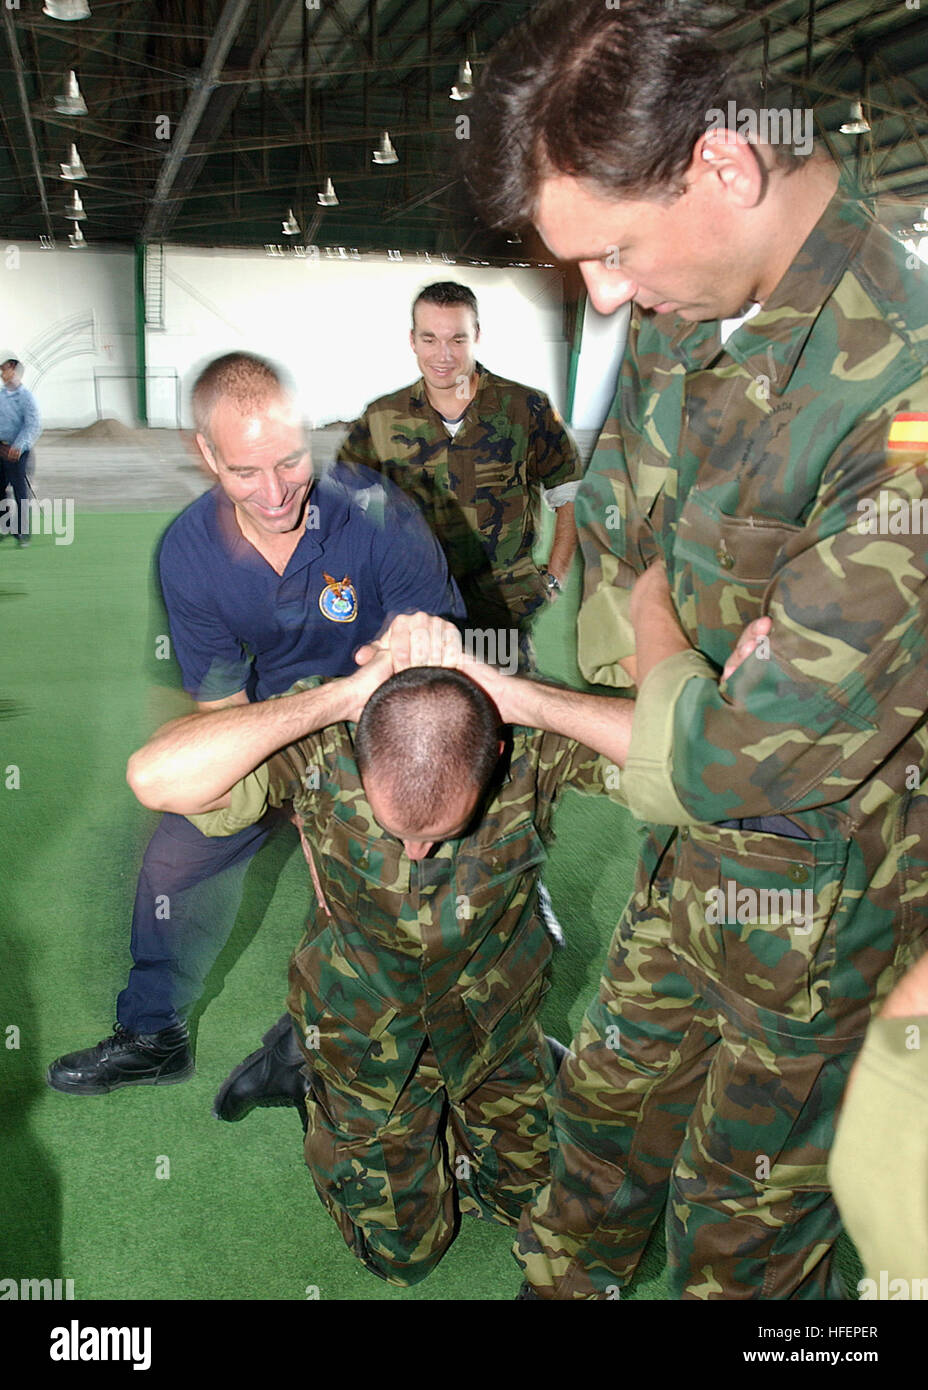 031014-N-2779T-004 Bahia Blanca, Argentina (Oct. 14, 2003) -- Sailors from South America and Spain get together to practice police apprehension techniques during a Maritime Interdiction Operations (MIO) training seminar conducted by members of the U.S. Coast Guard International Training Division.  Sailors from six nations participated in this training evolution scheduled as part of UNITAS, hosted by Argentina.  Sponsored by U.S. Naval Forces Southern Command, UNITAS is the largest multi-national maritime exercise in the western hemisphere.  During UNITAS Atlantic phase, naval forces from Argen Stock Photo